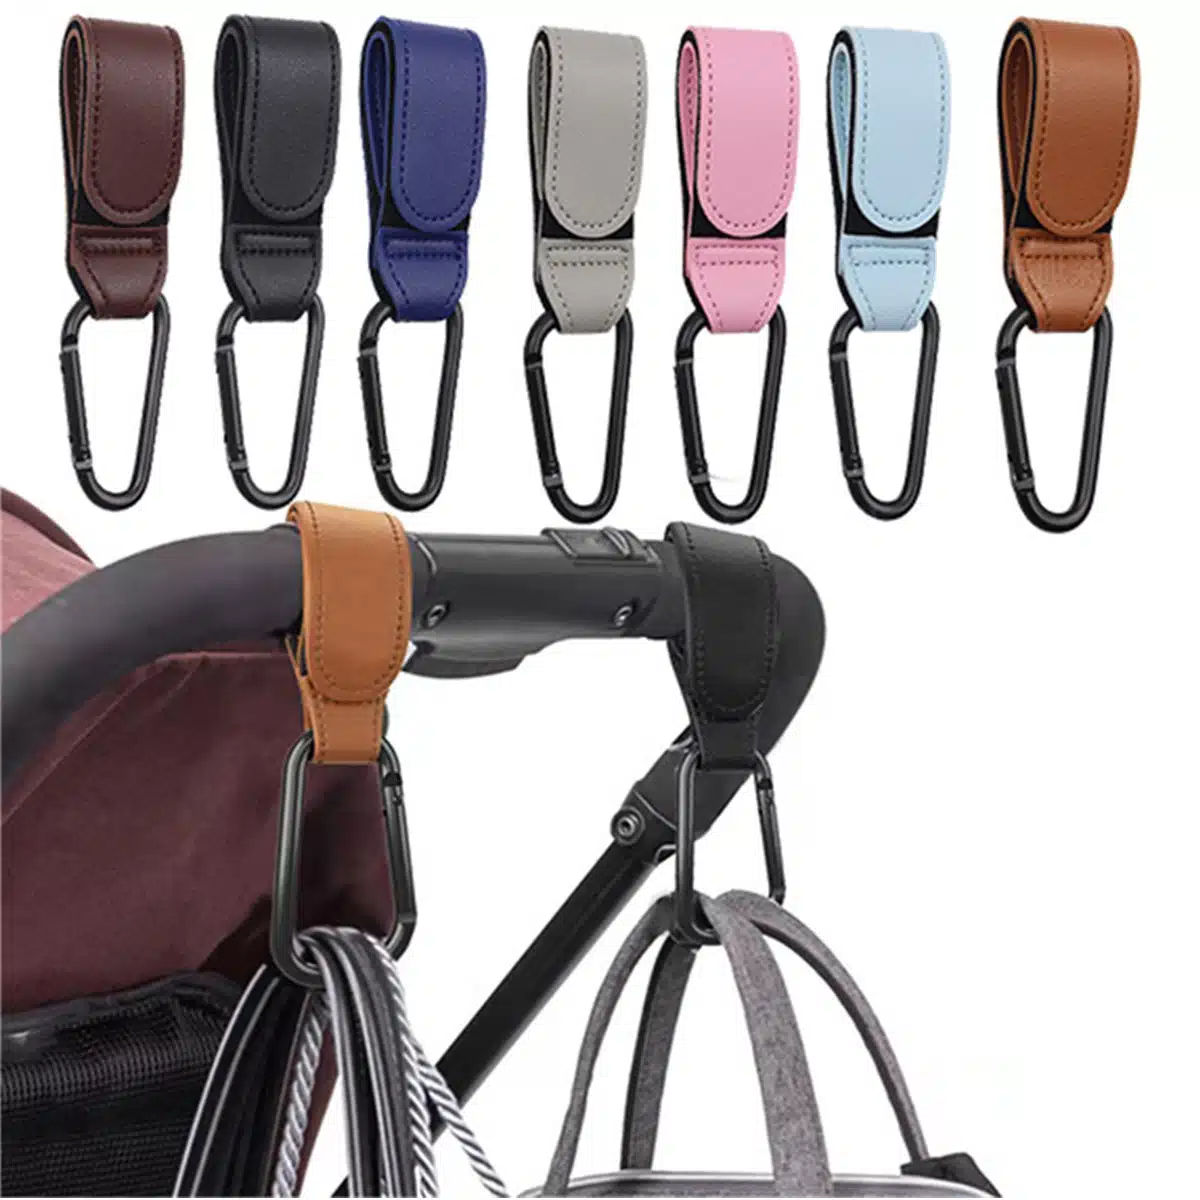 https://weanjay.com/wp-content/uploads/2023/03/Keep-Your-Hands-Free-with-the-Stroller-Hook-15.webp